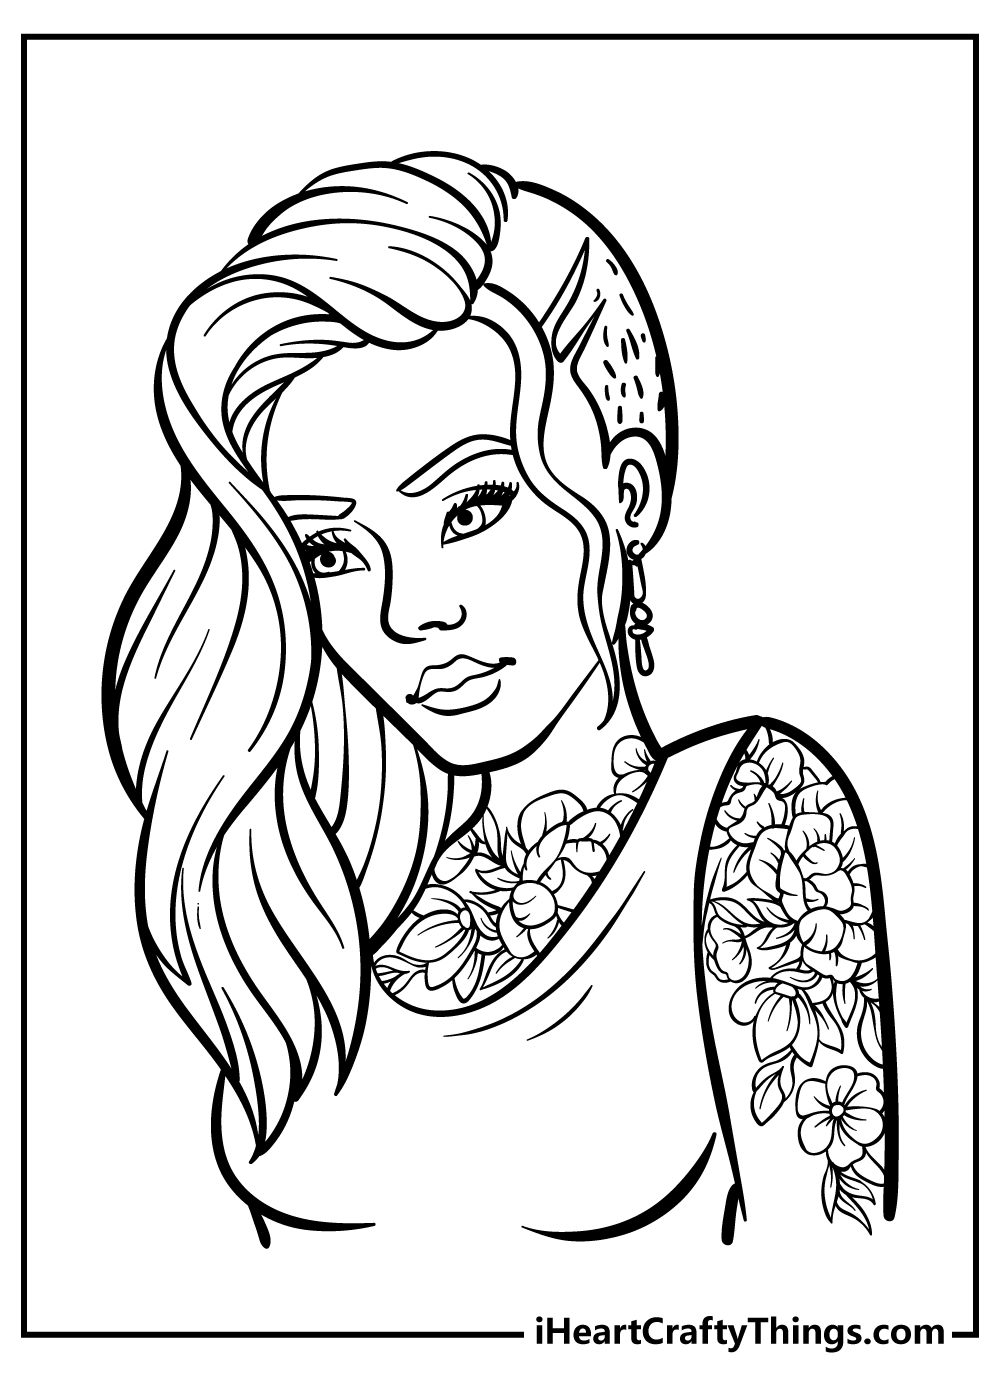 Vampire Diaries Coloring Pages Horse Coloring Pages Coloring Pages Detailed Coloring Pages Pin 